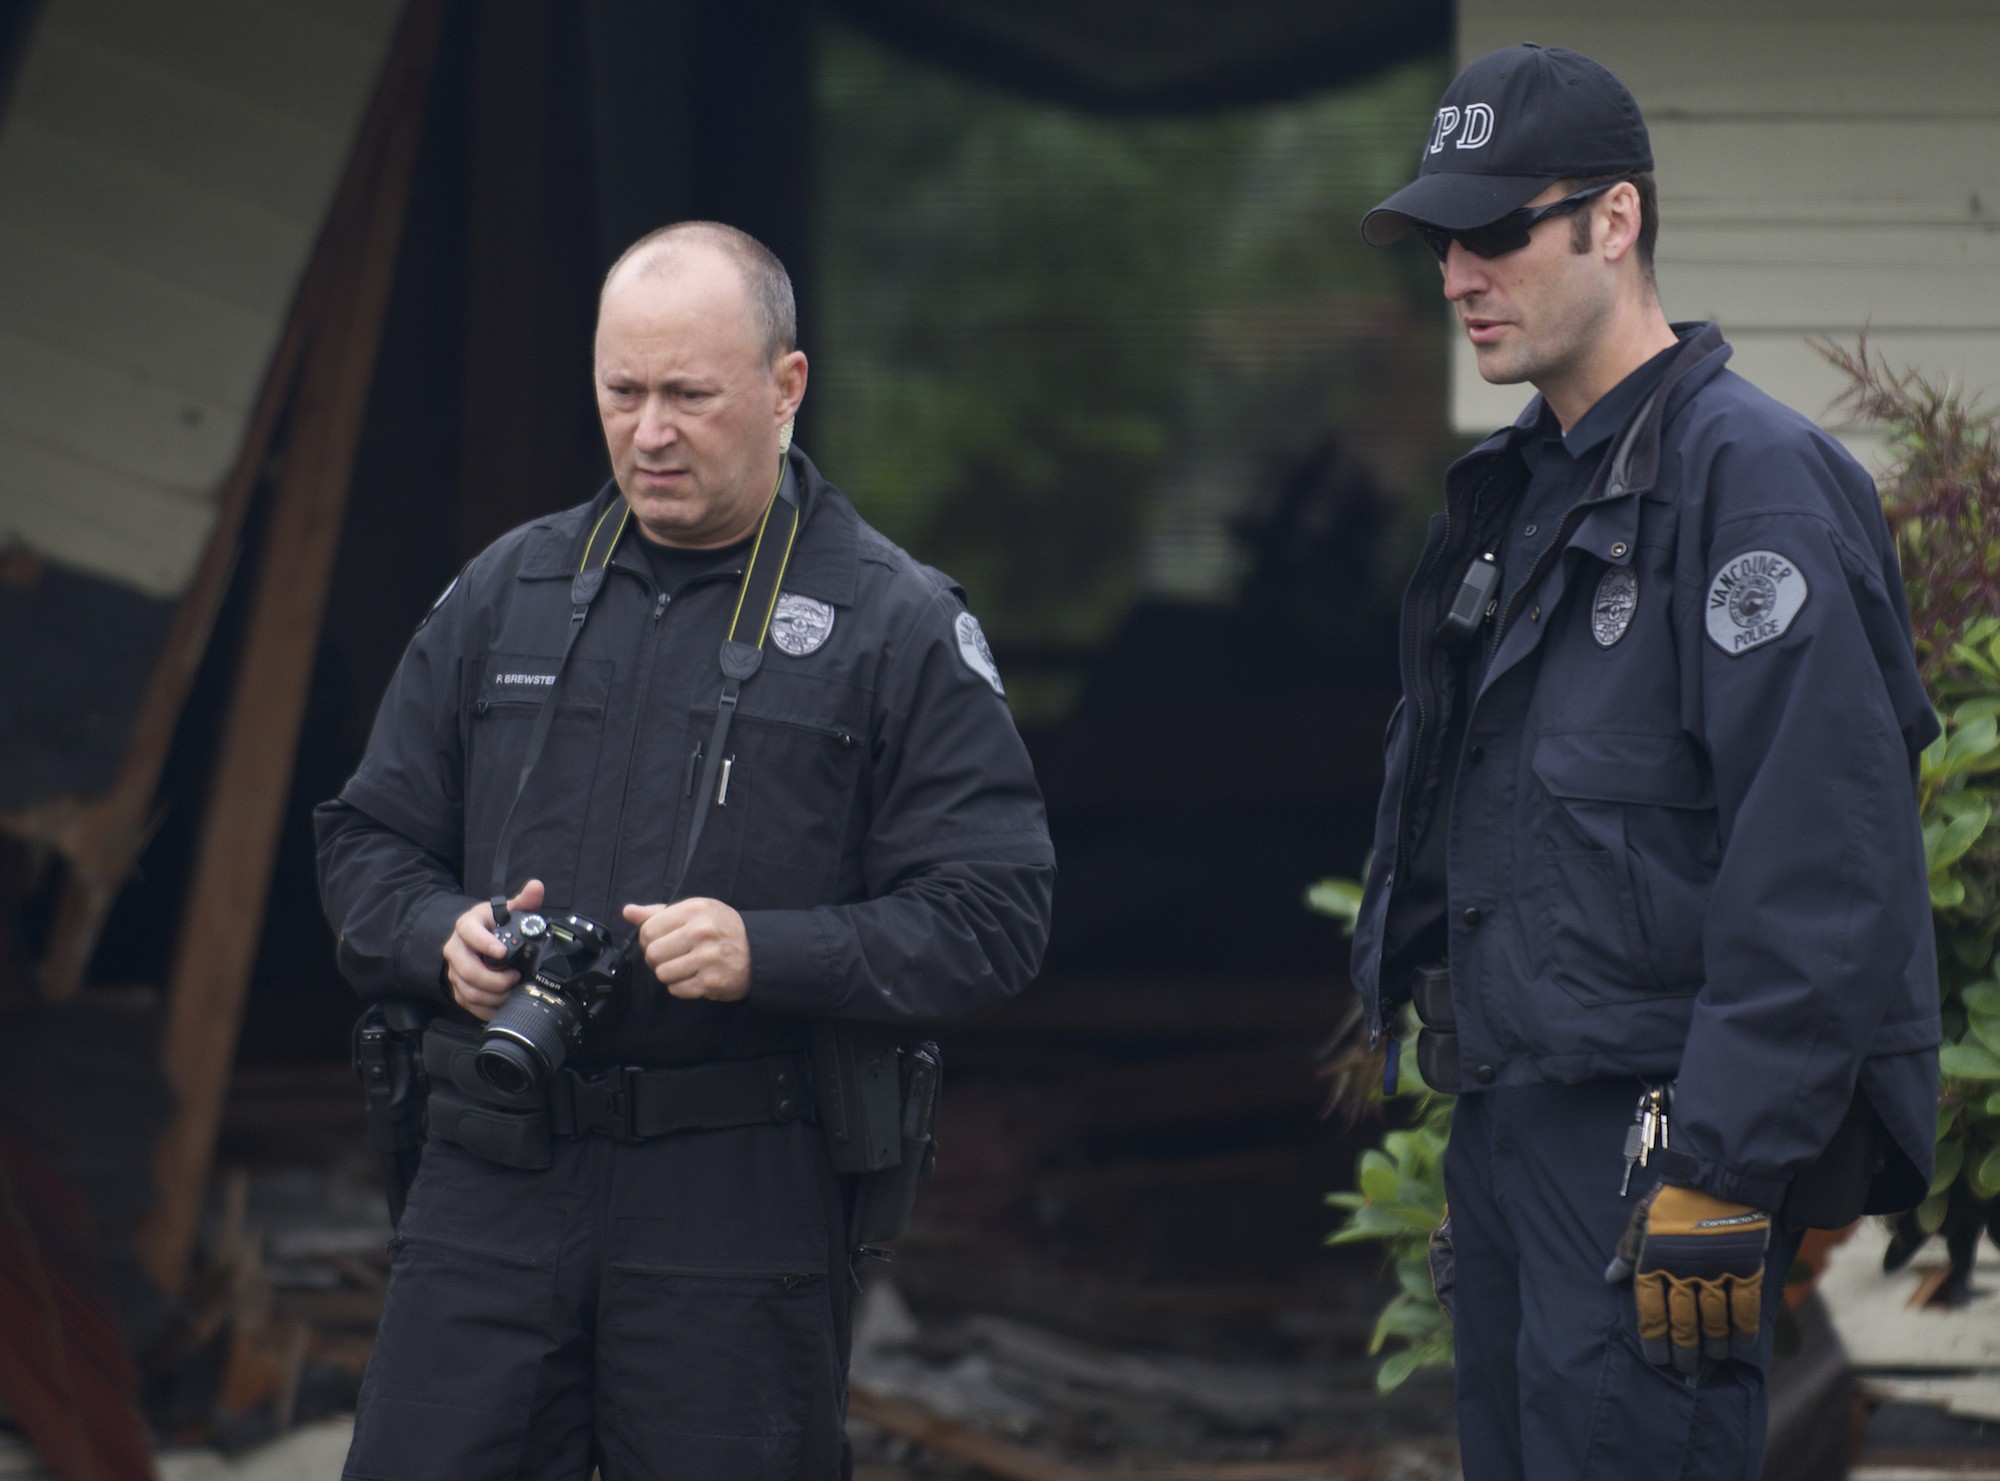 Dustin Goudschaal, right, and Paul Brewster of the Vancouver Police Department inspect a car that ran into an east Vancouver house on June 14.